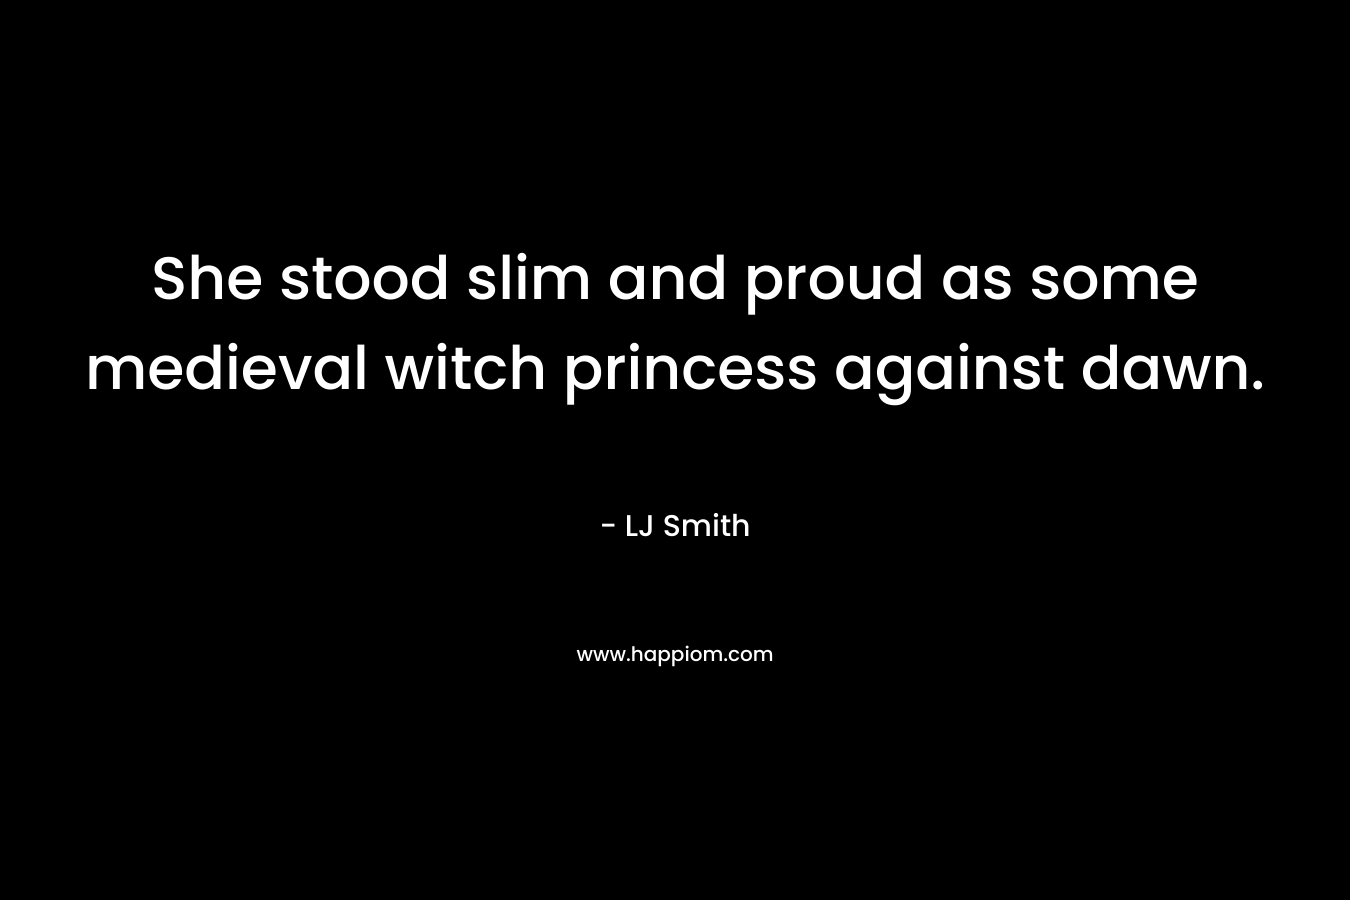 She stood slim and proud as some medieval witch princess against dawn. – LJ Smith